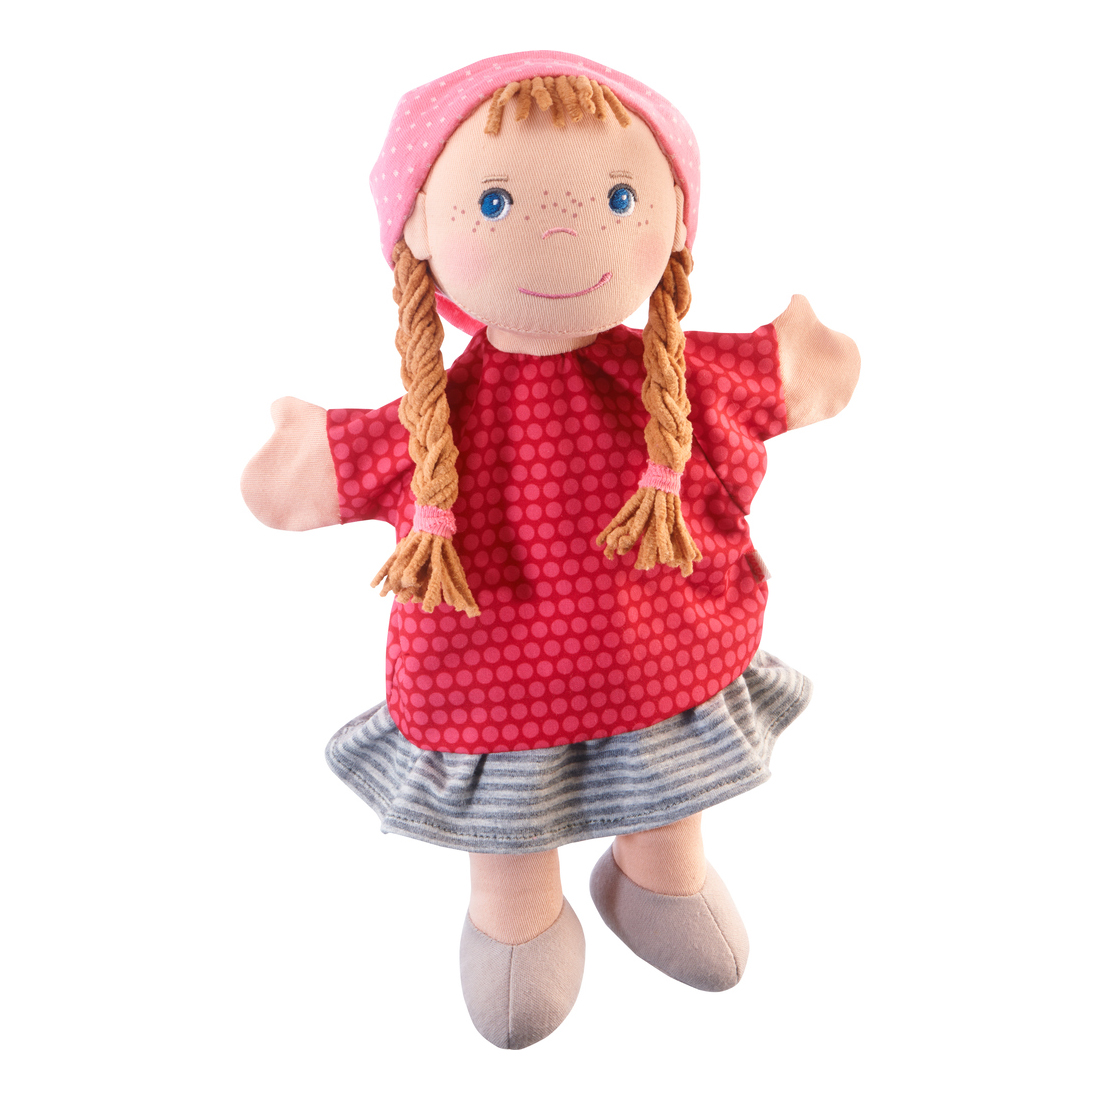 Gretel - hand puppet for babies by HABA